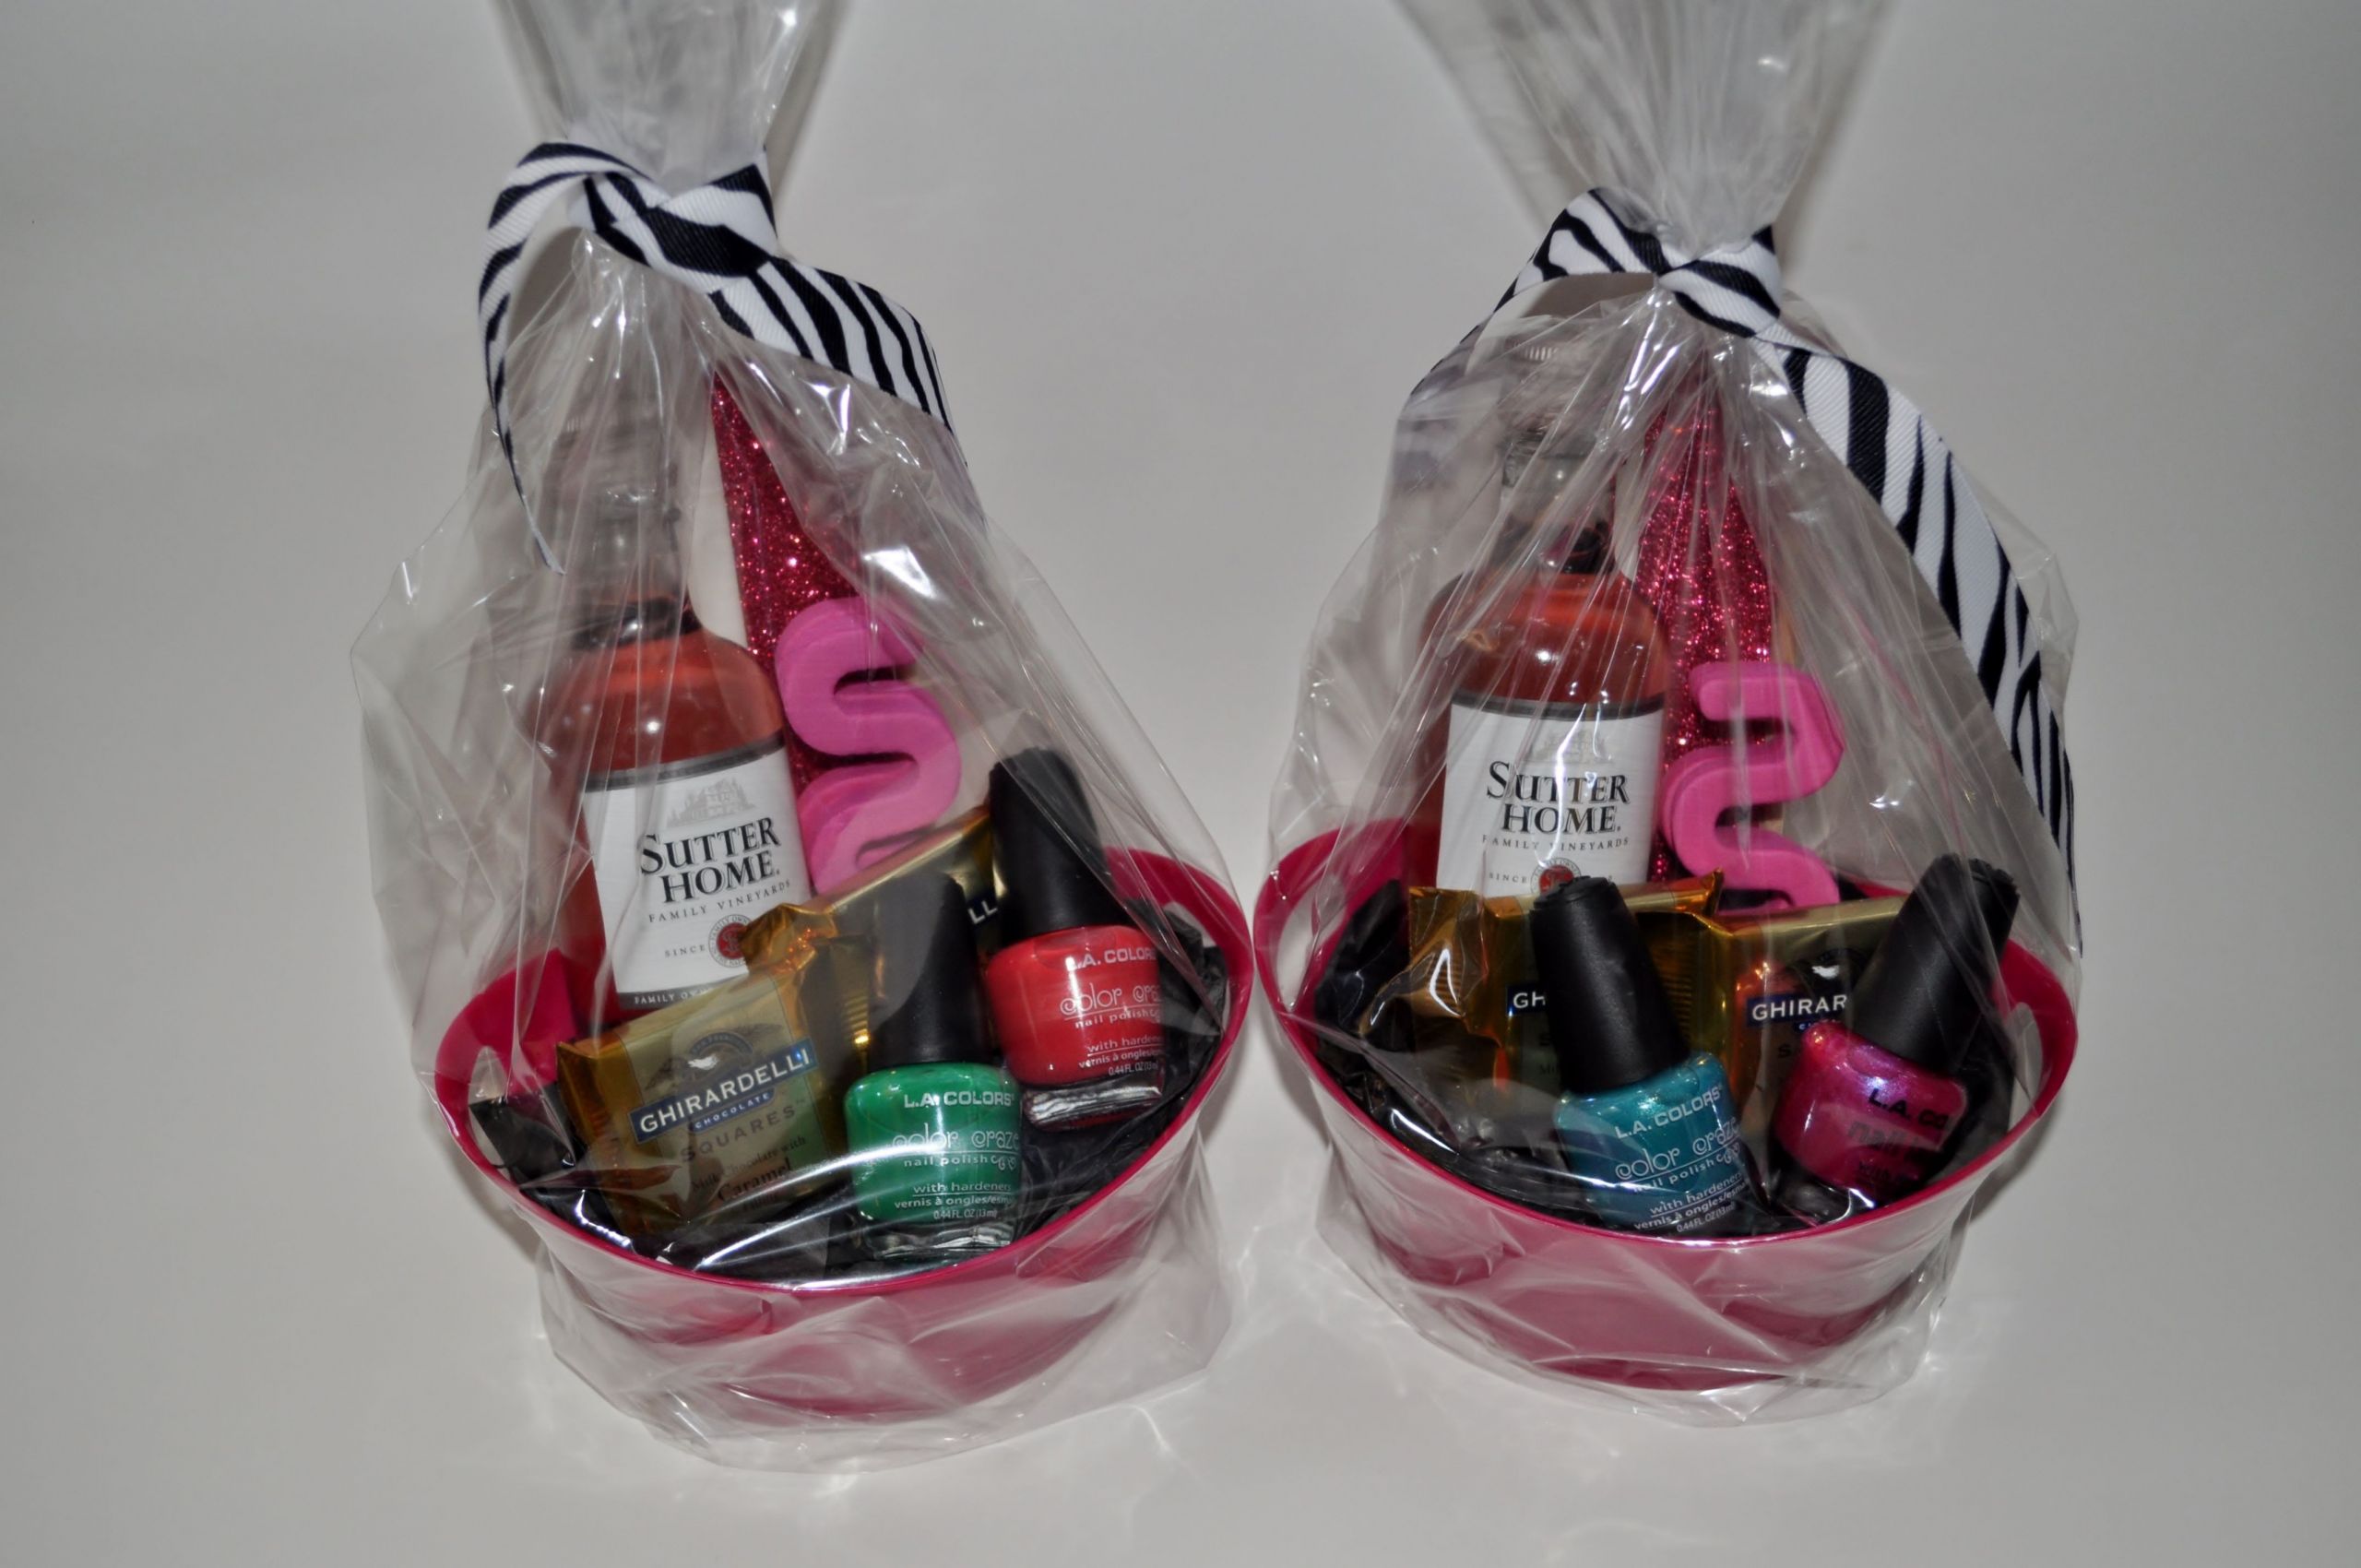 Girls Night Gift Ideas
 Gift Baskets for Girls Night Out